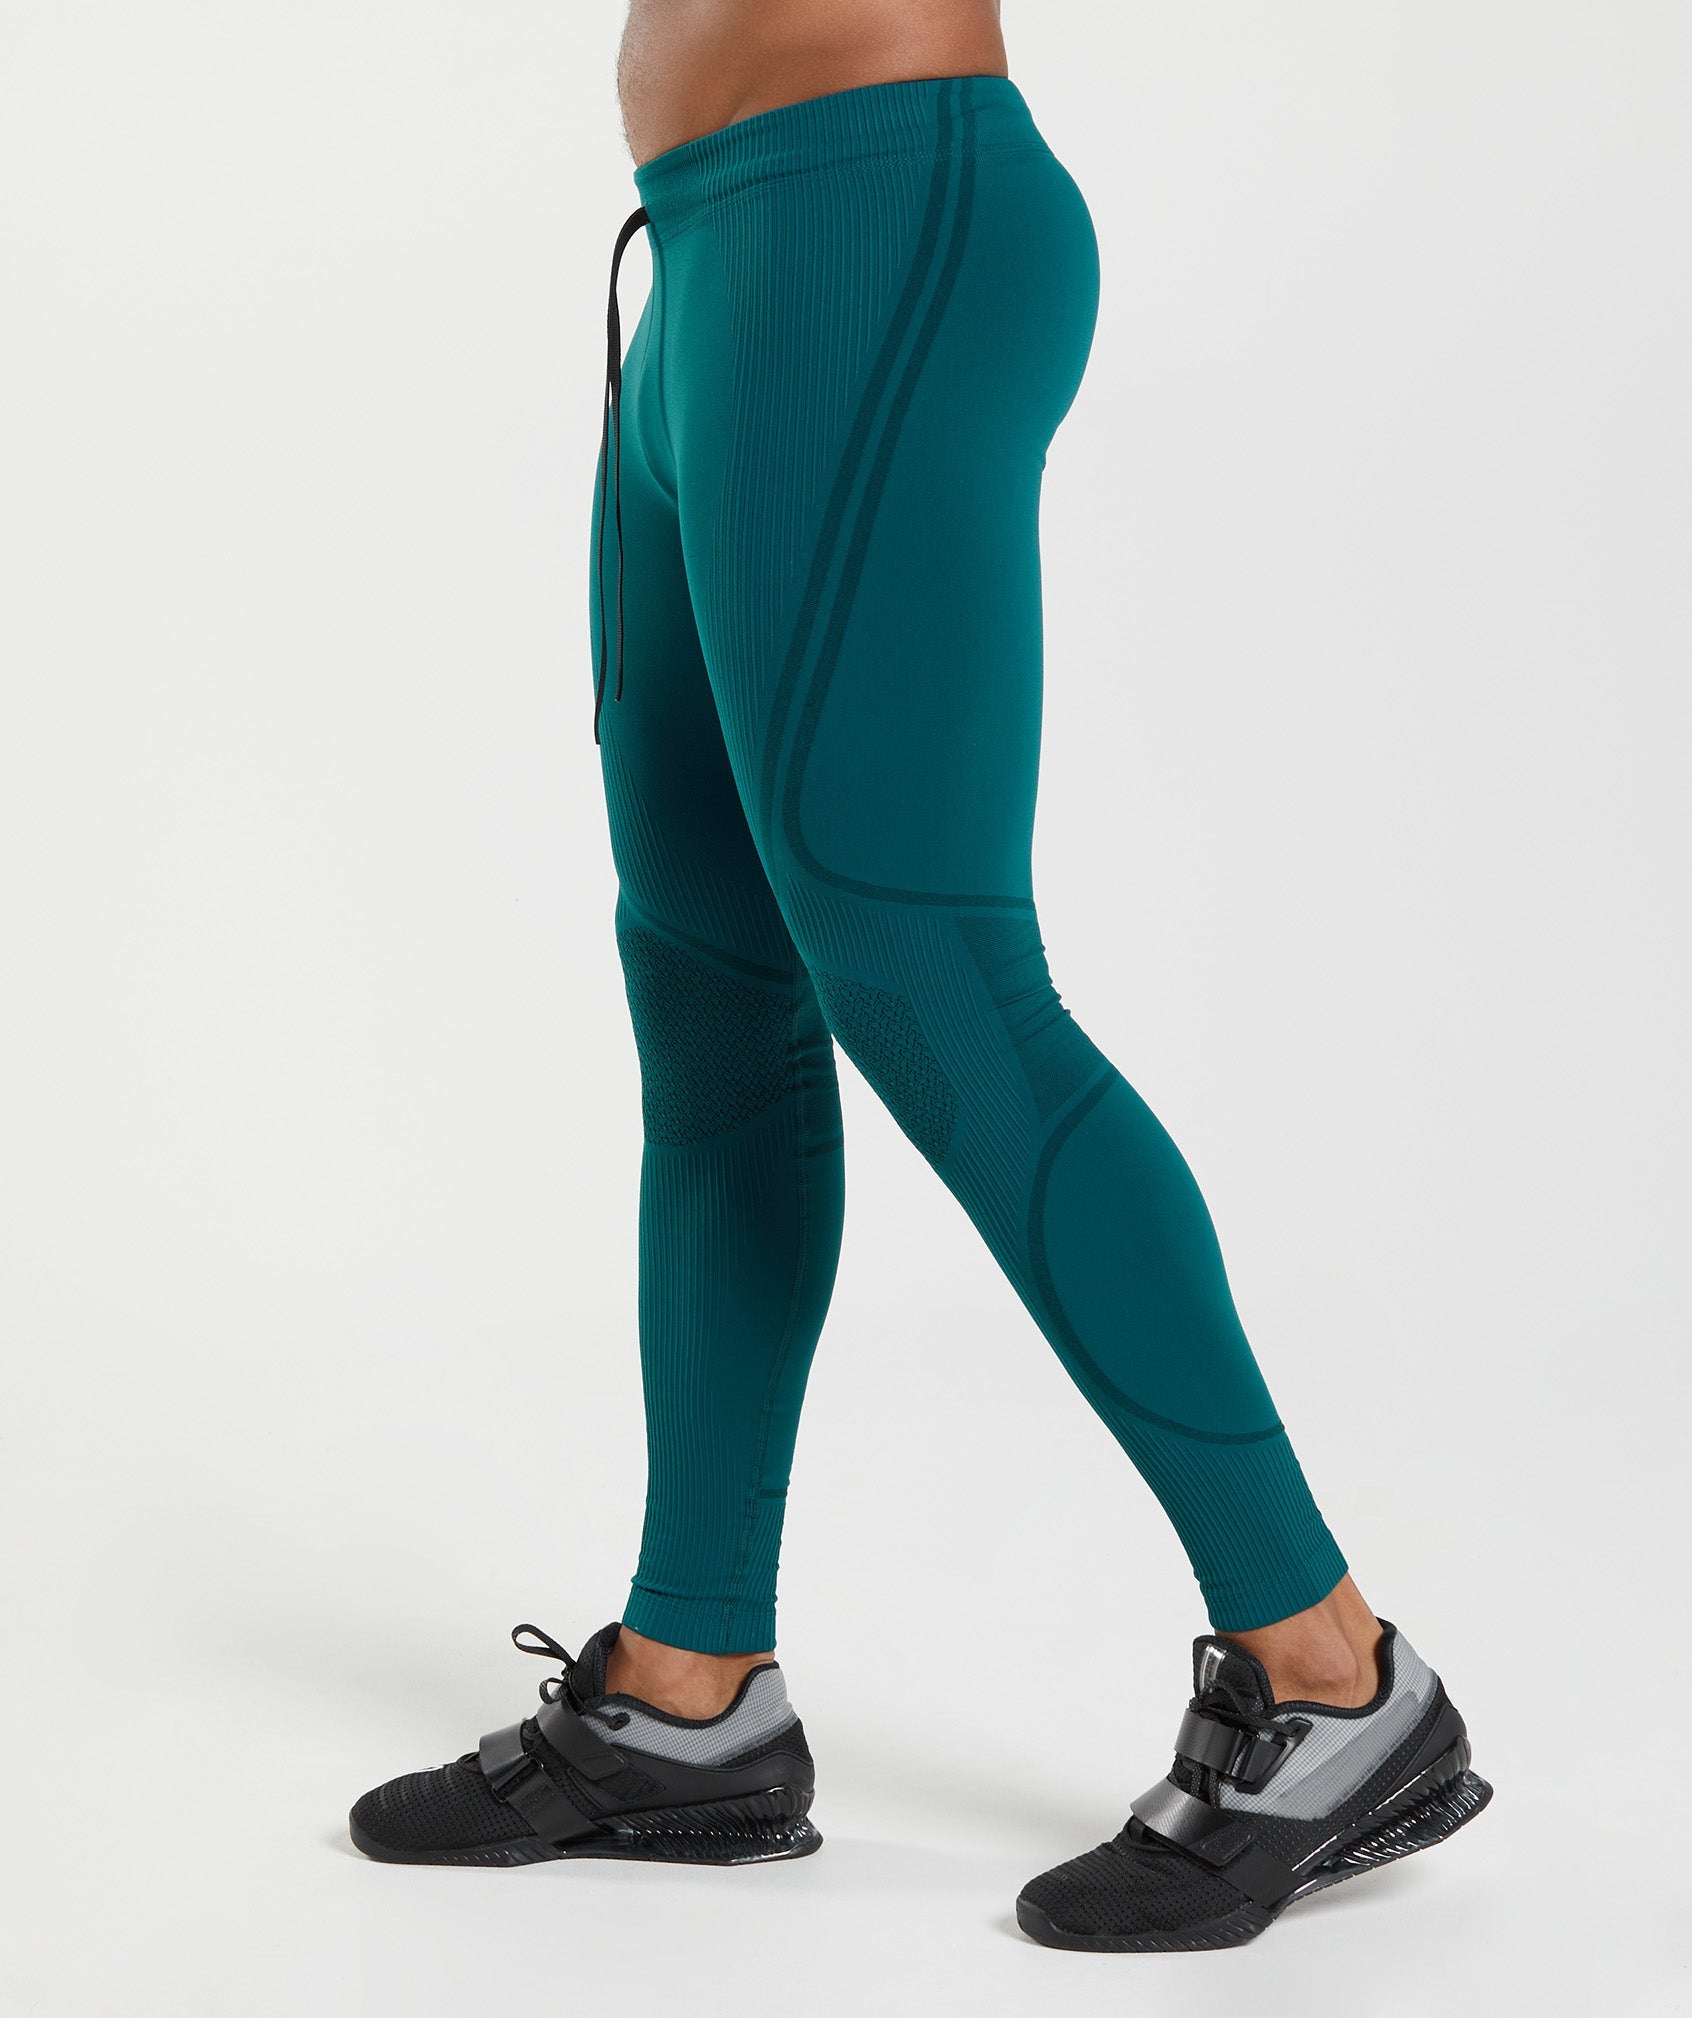 315 Seamless Tights in Winter Teal/Black